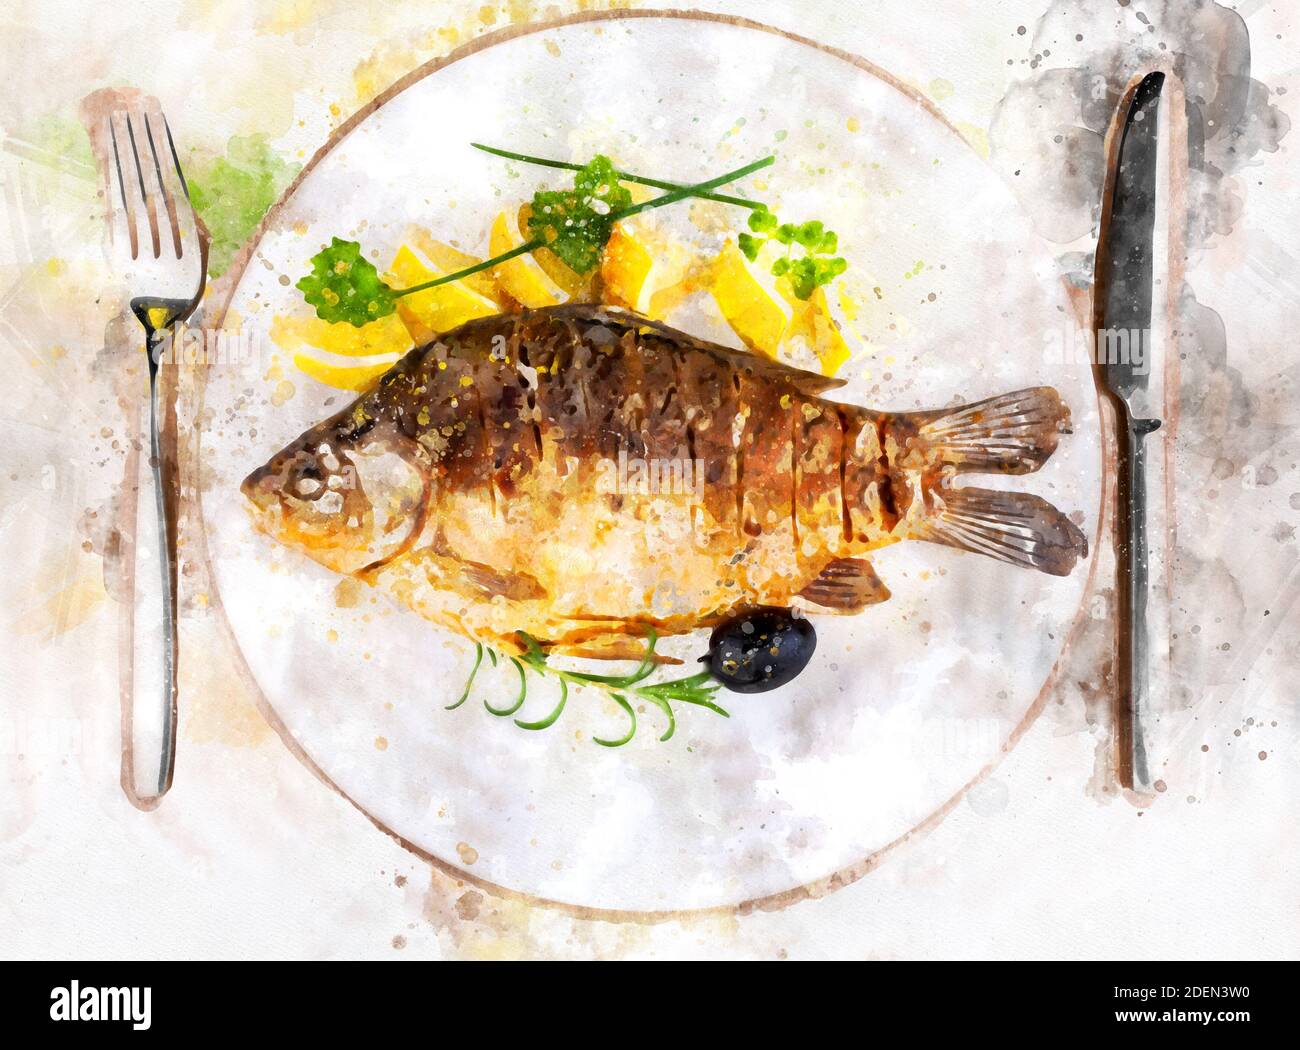 Fried fish on white plate with fork and knife, illustration Stock Photo